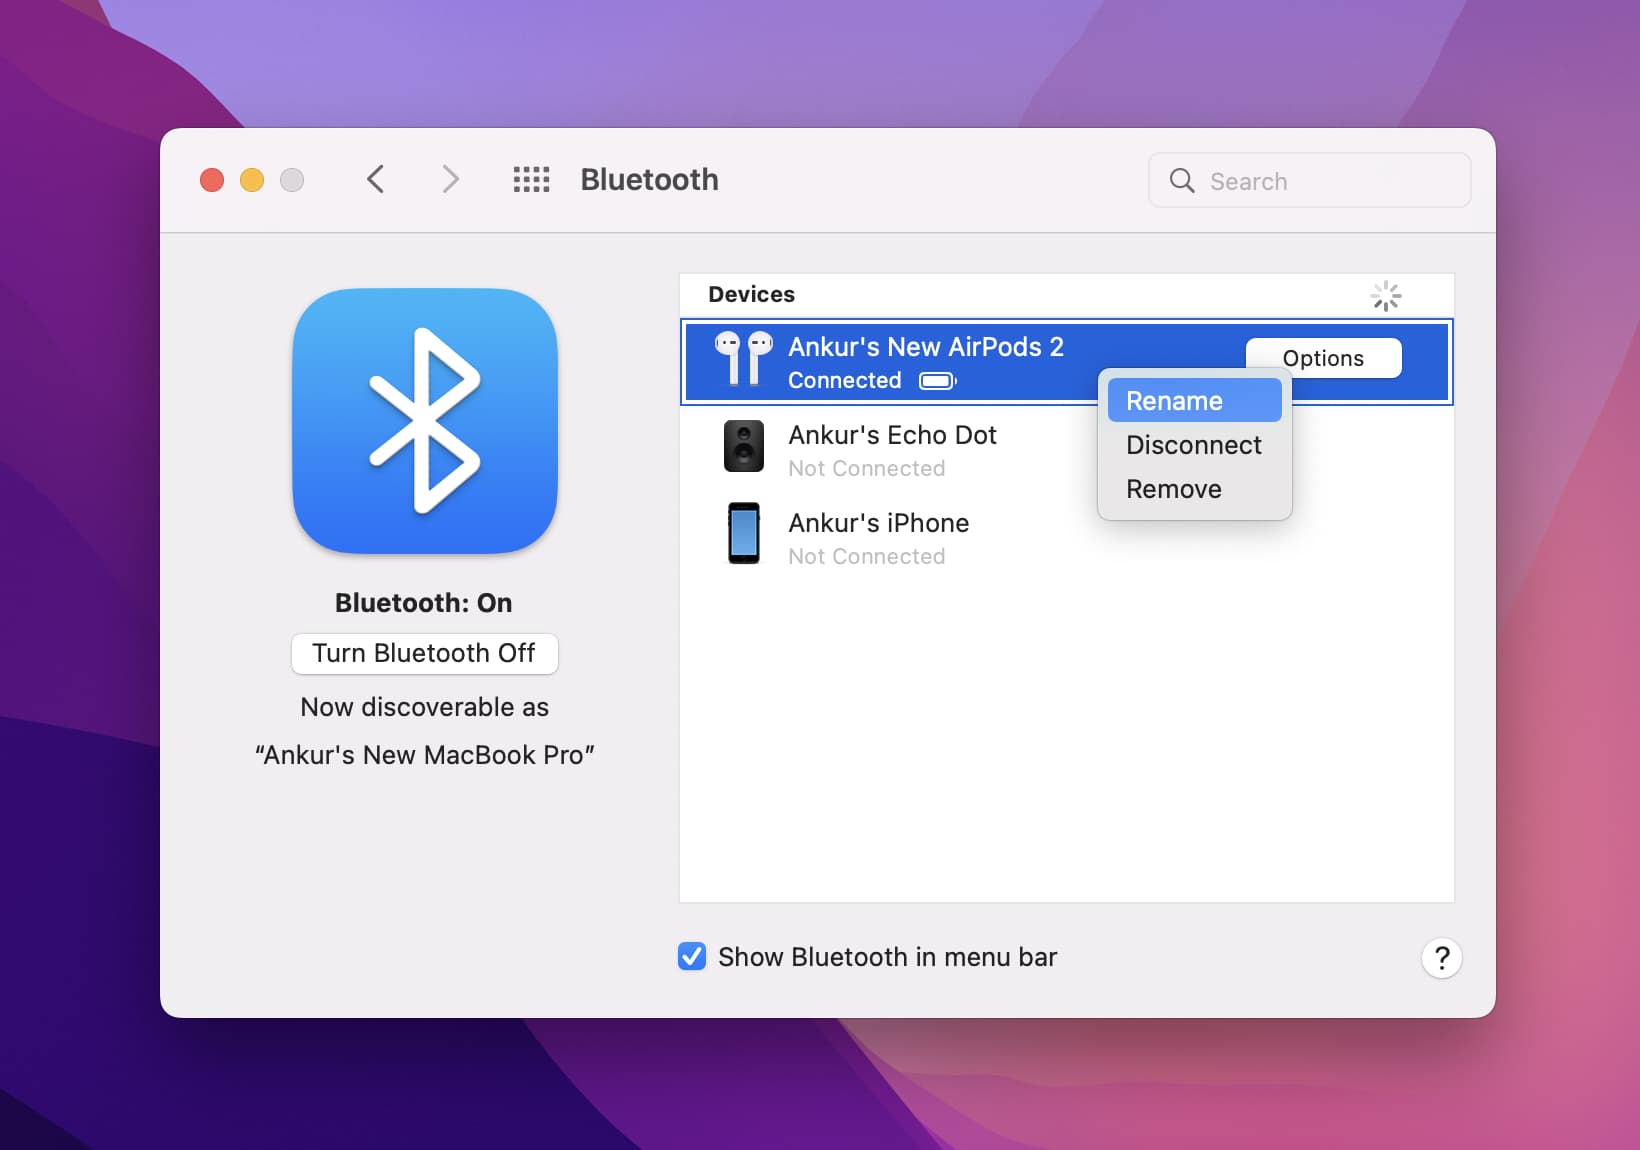 Steps to change the name of a Bluetooth device on Mac